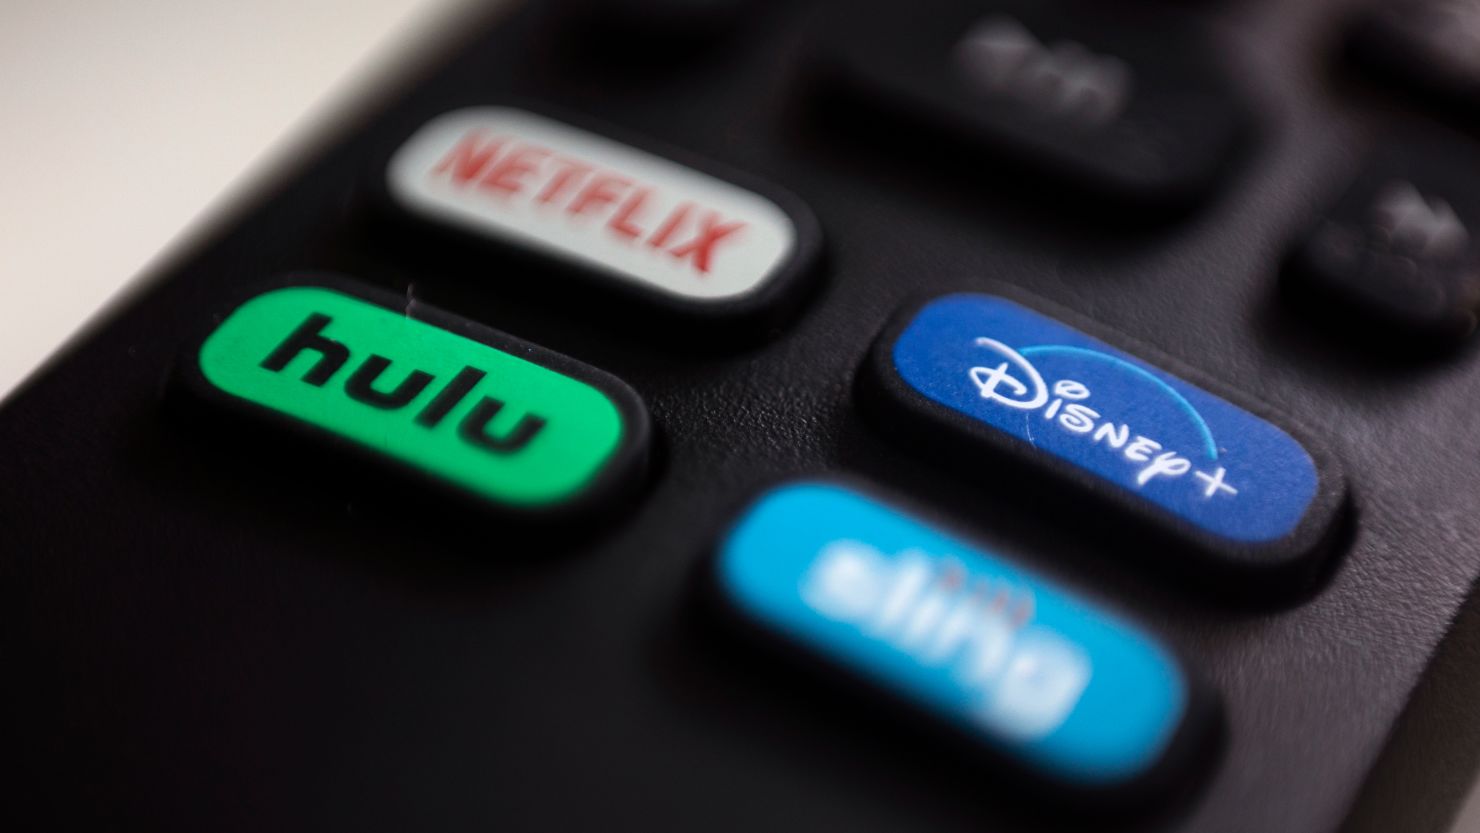 The logos of Hulu and Disney Plus are pictured on a remote control in Portland, Oregon on August 13, 2020.